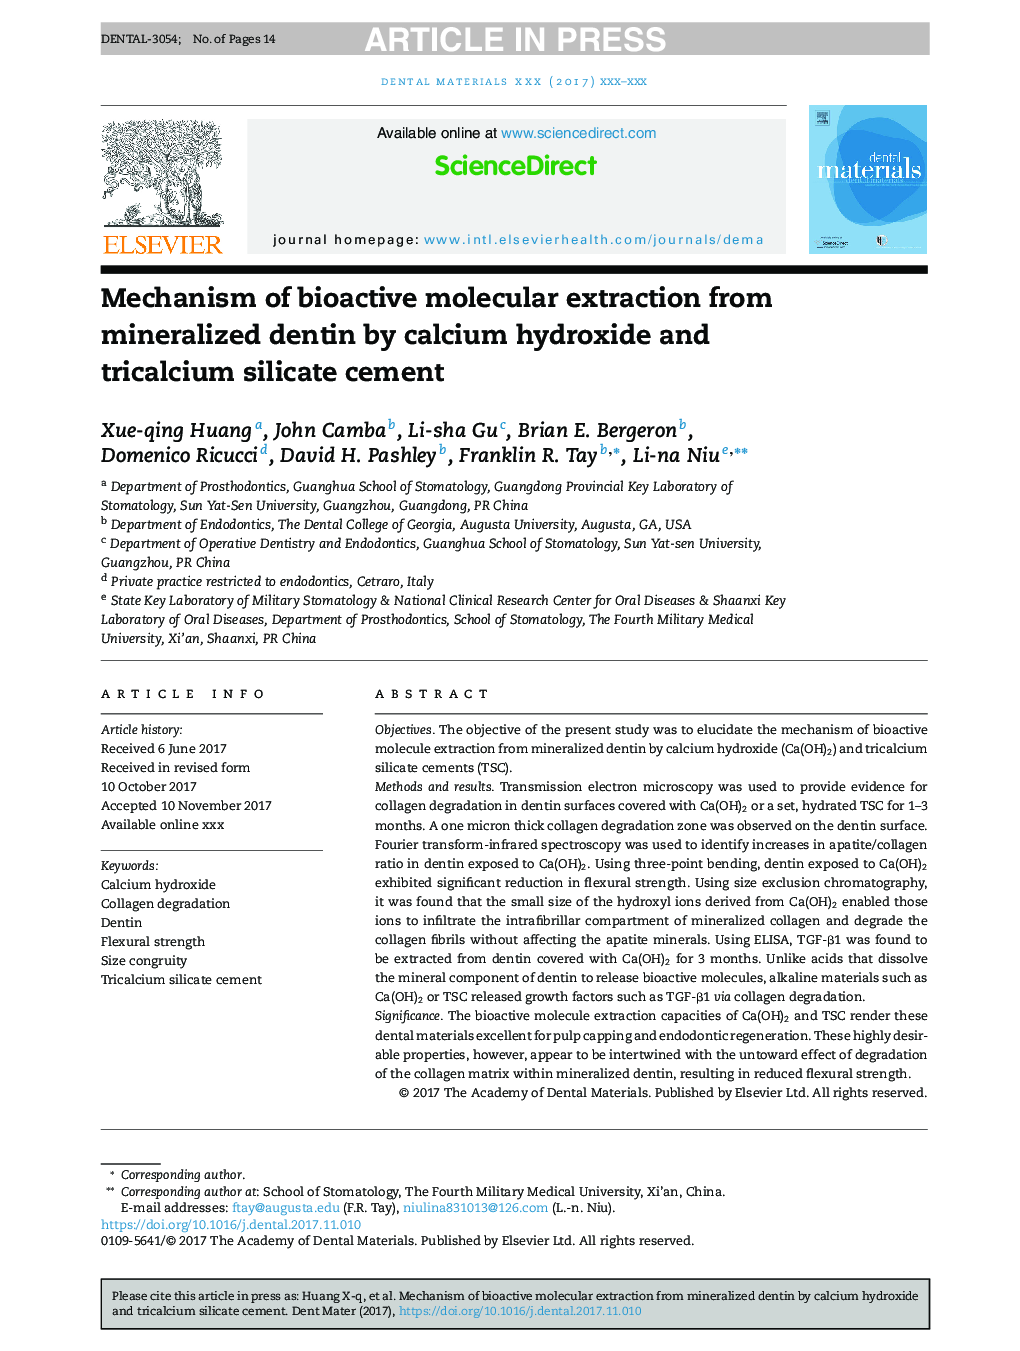 Mechanism of bioactive molecular extraction from mineralized dentin by calcium hydroxide and tricalcium silicate cement